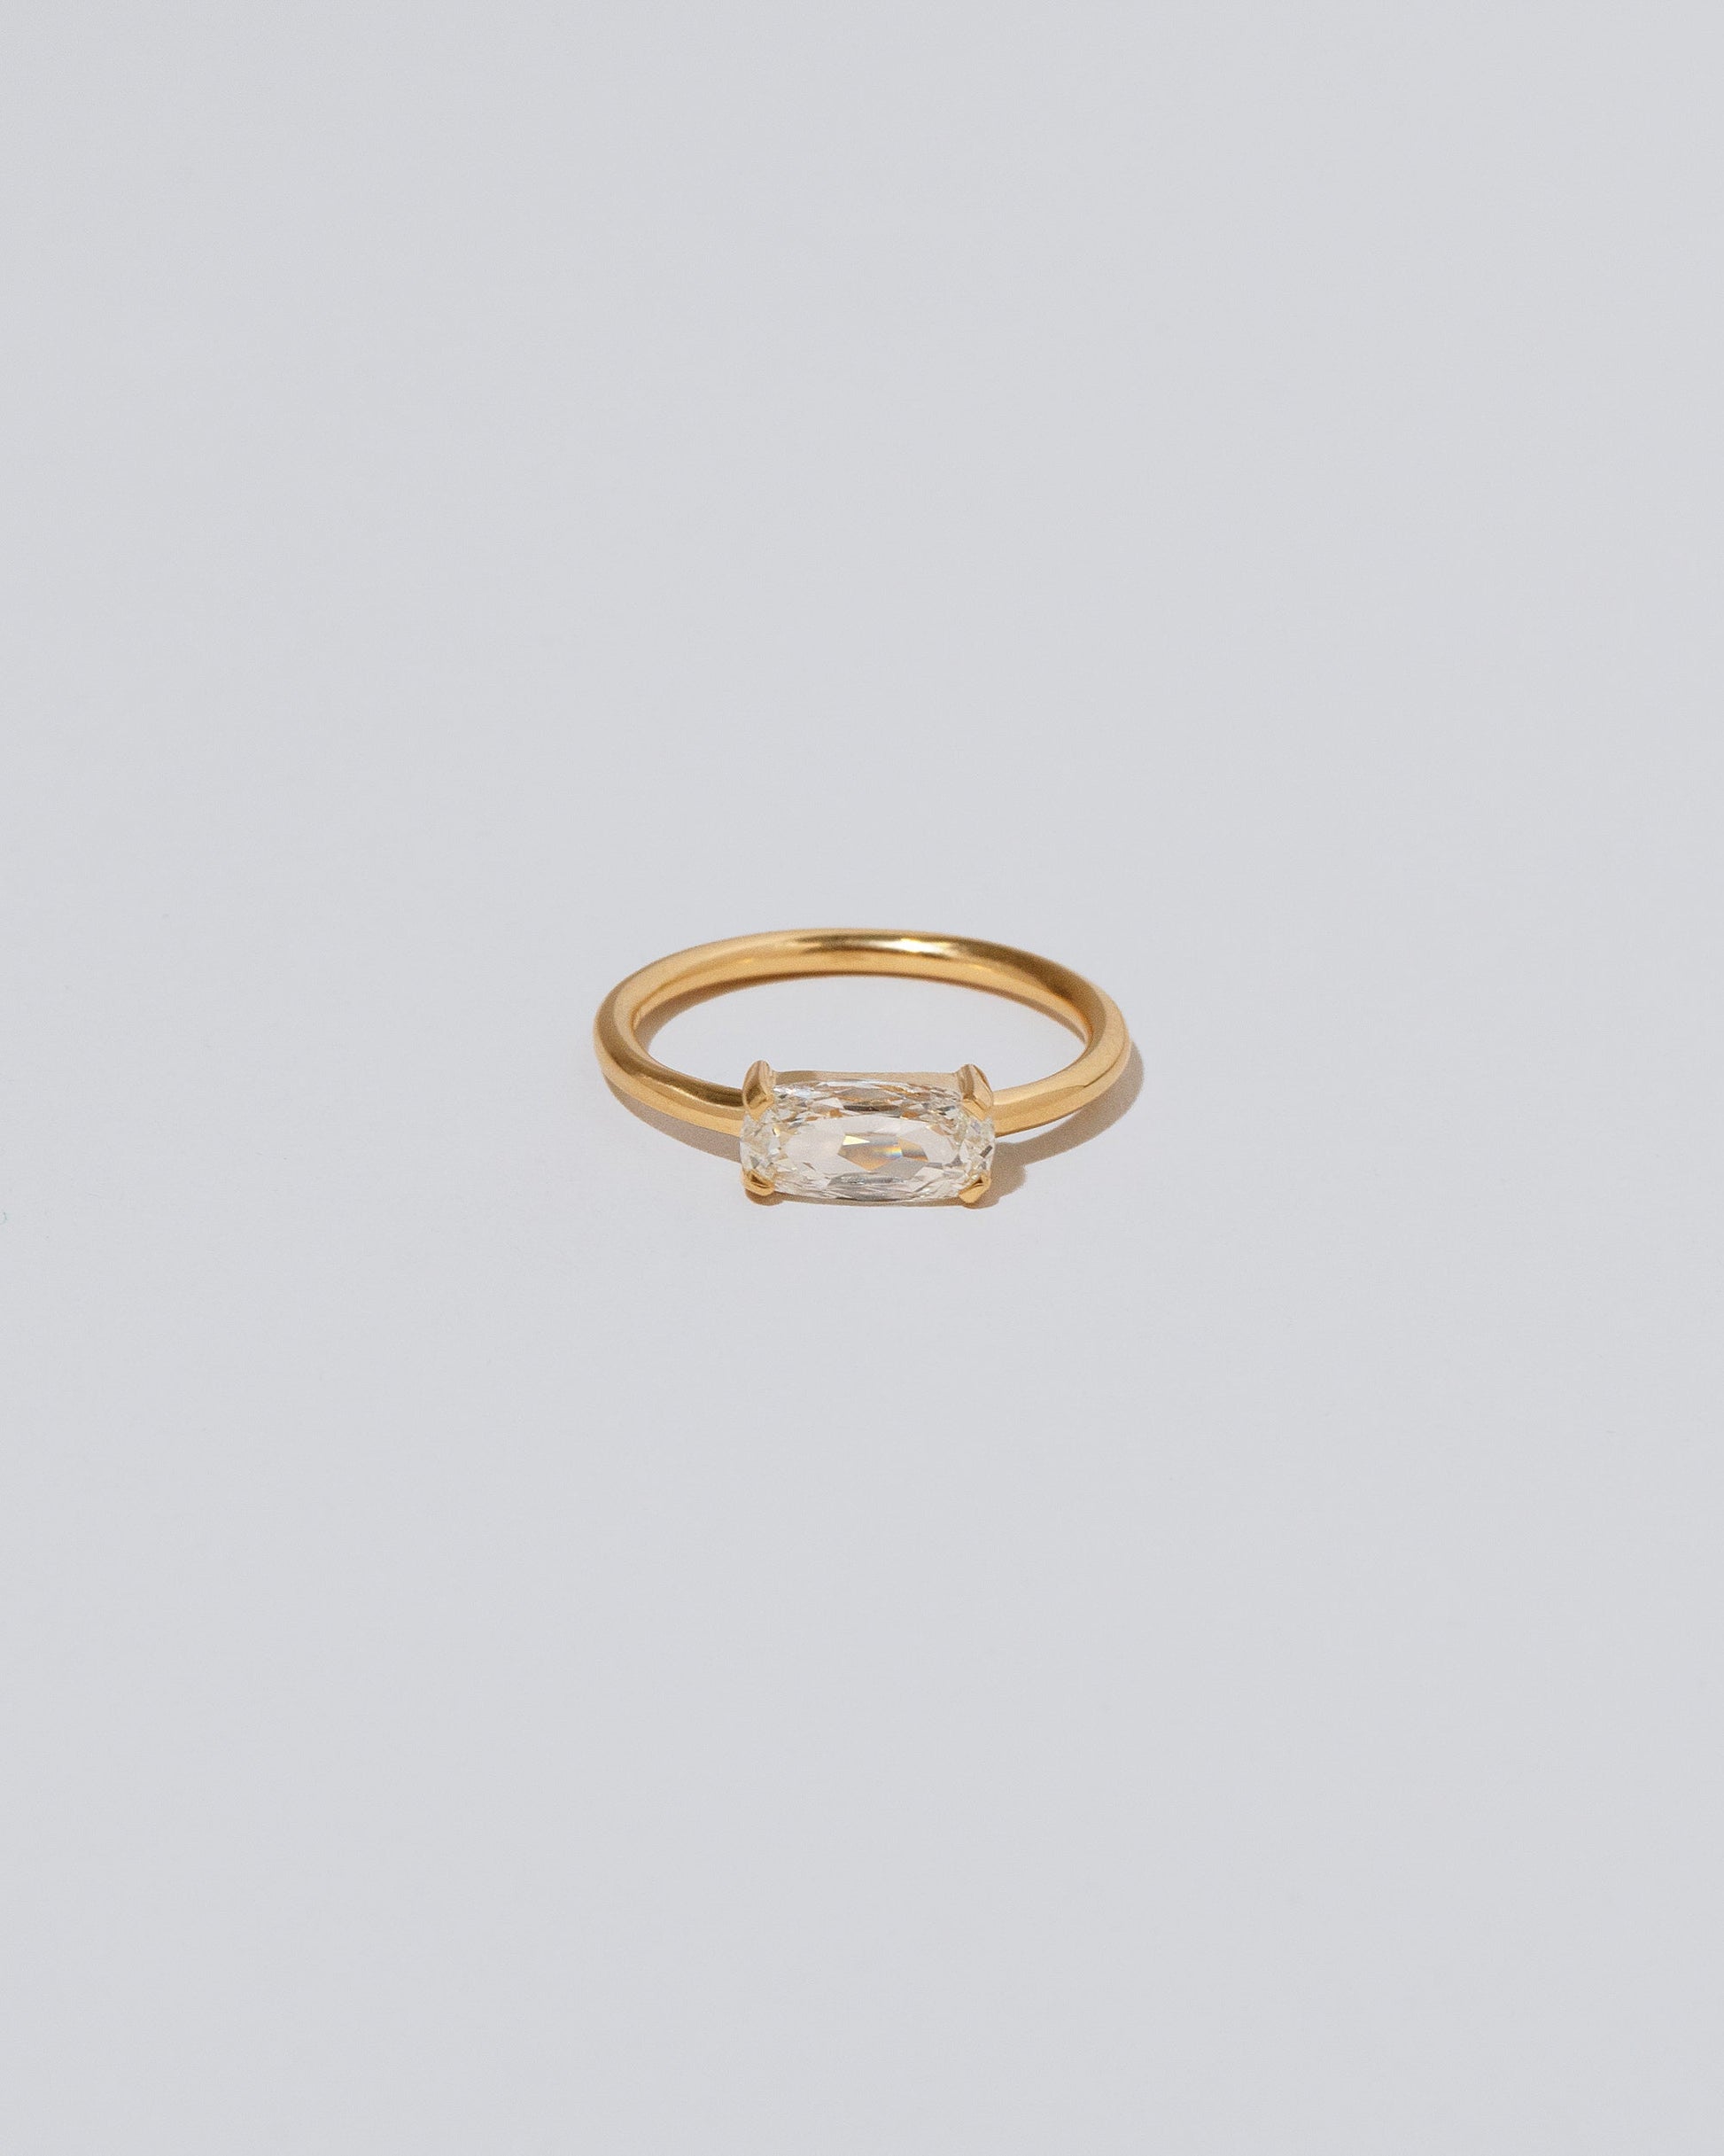 Product photo of the Adage Ring on light color background